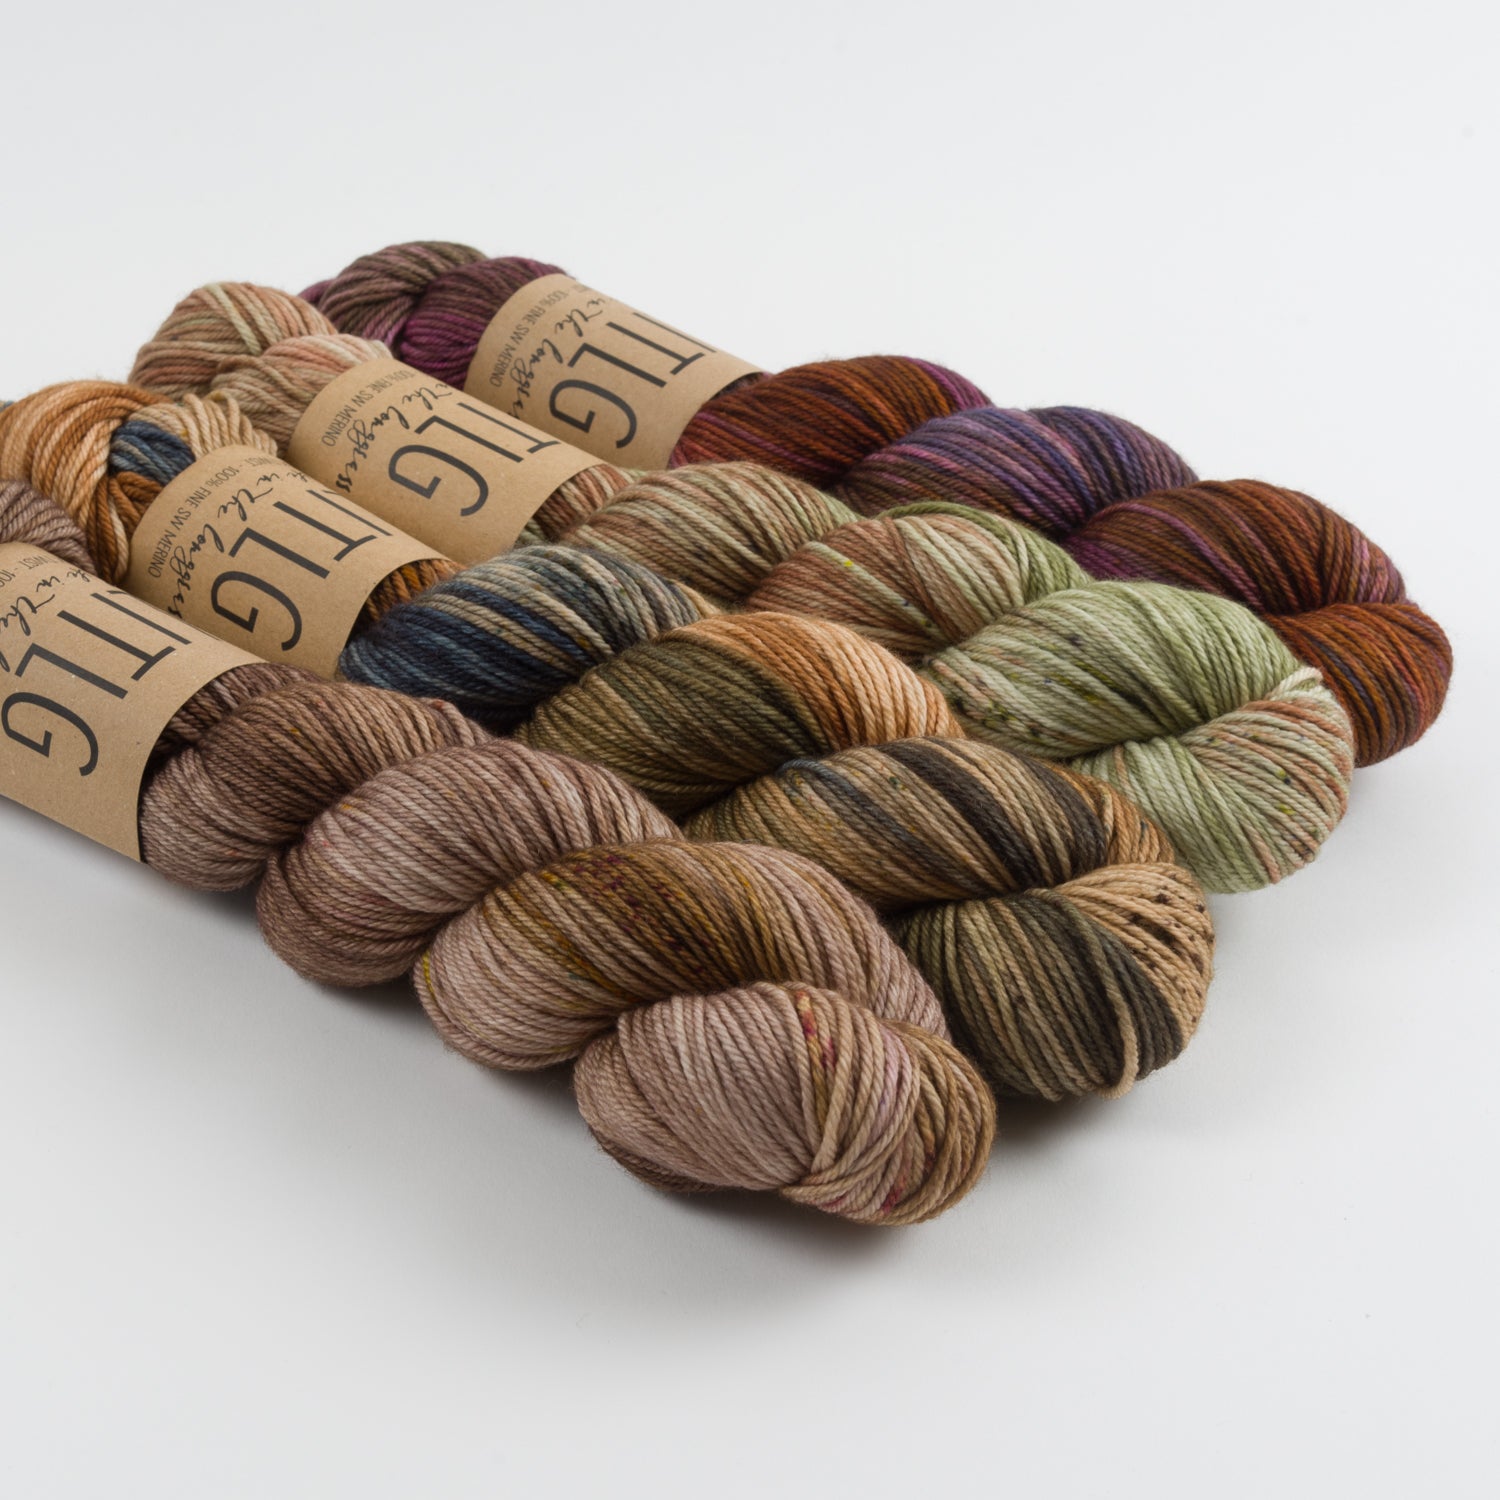 WESTKNITS KIT - WEATHERED CLAY